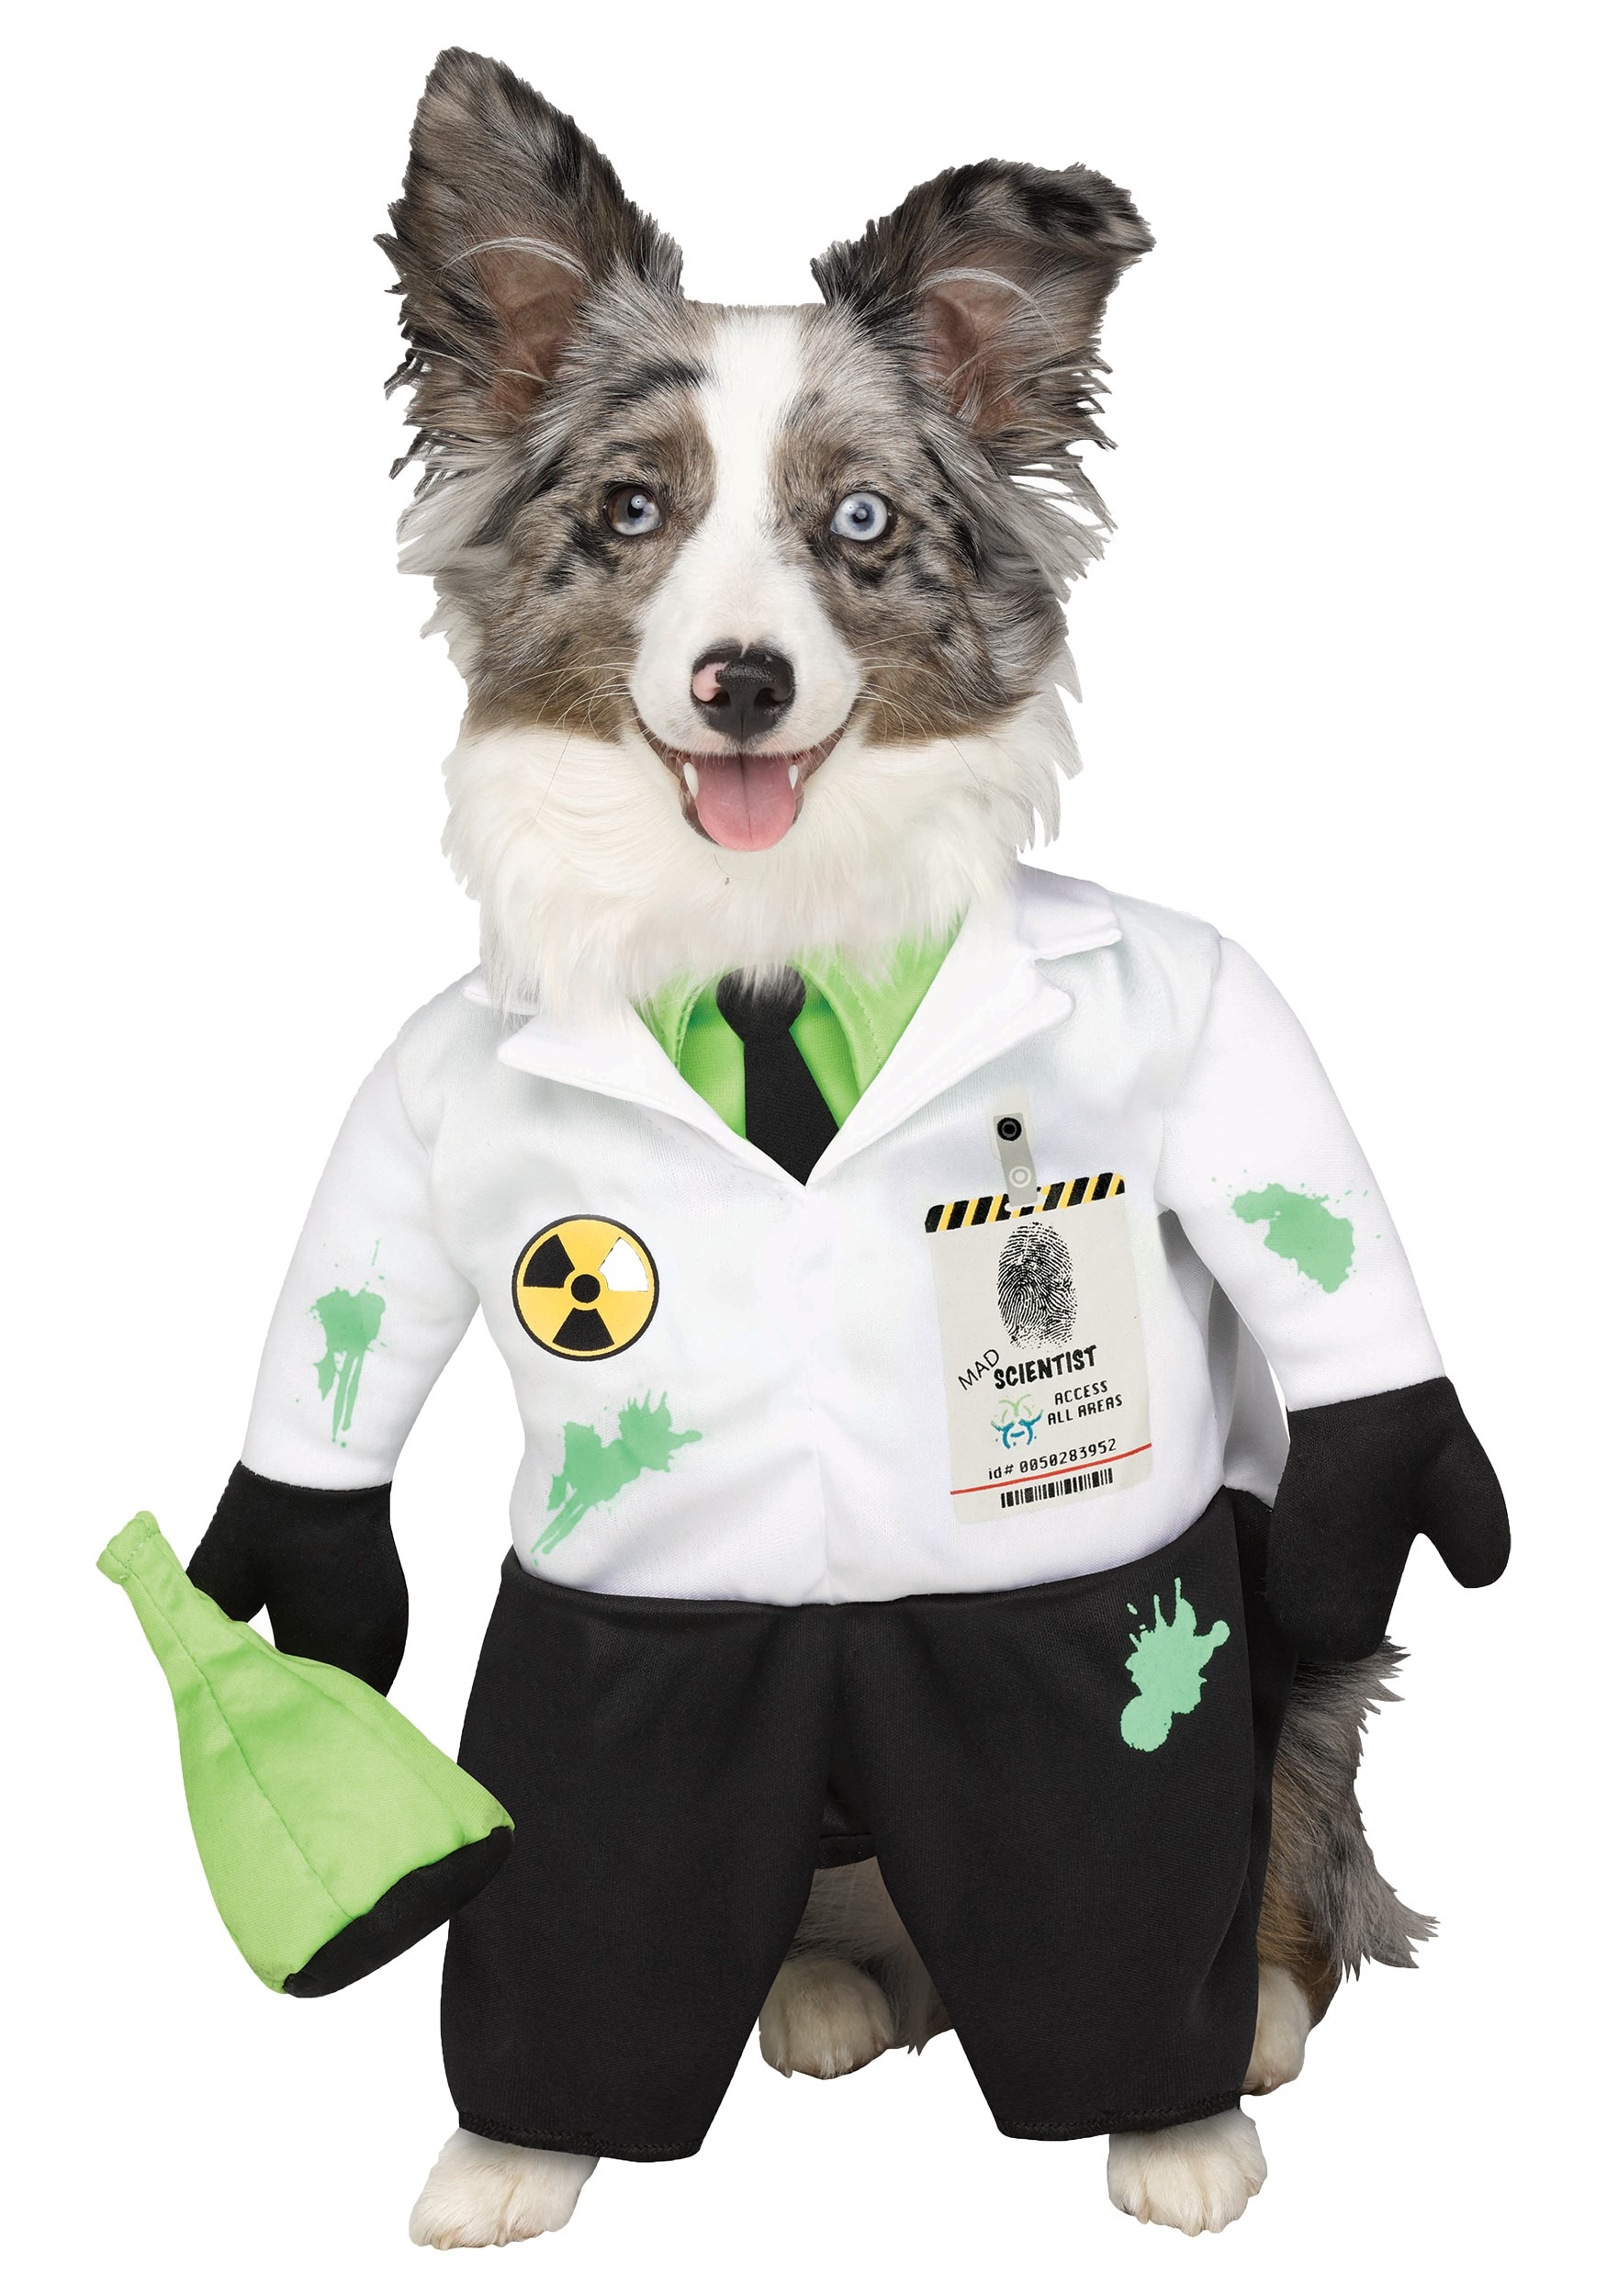  Mad  Scientist Costume  for Pets